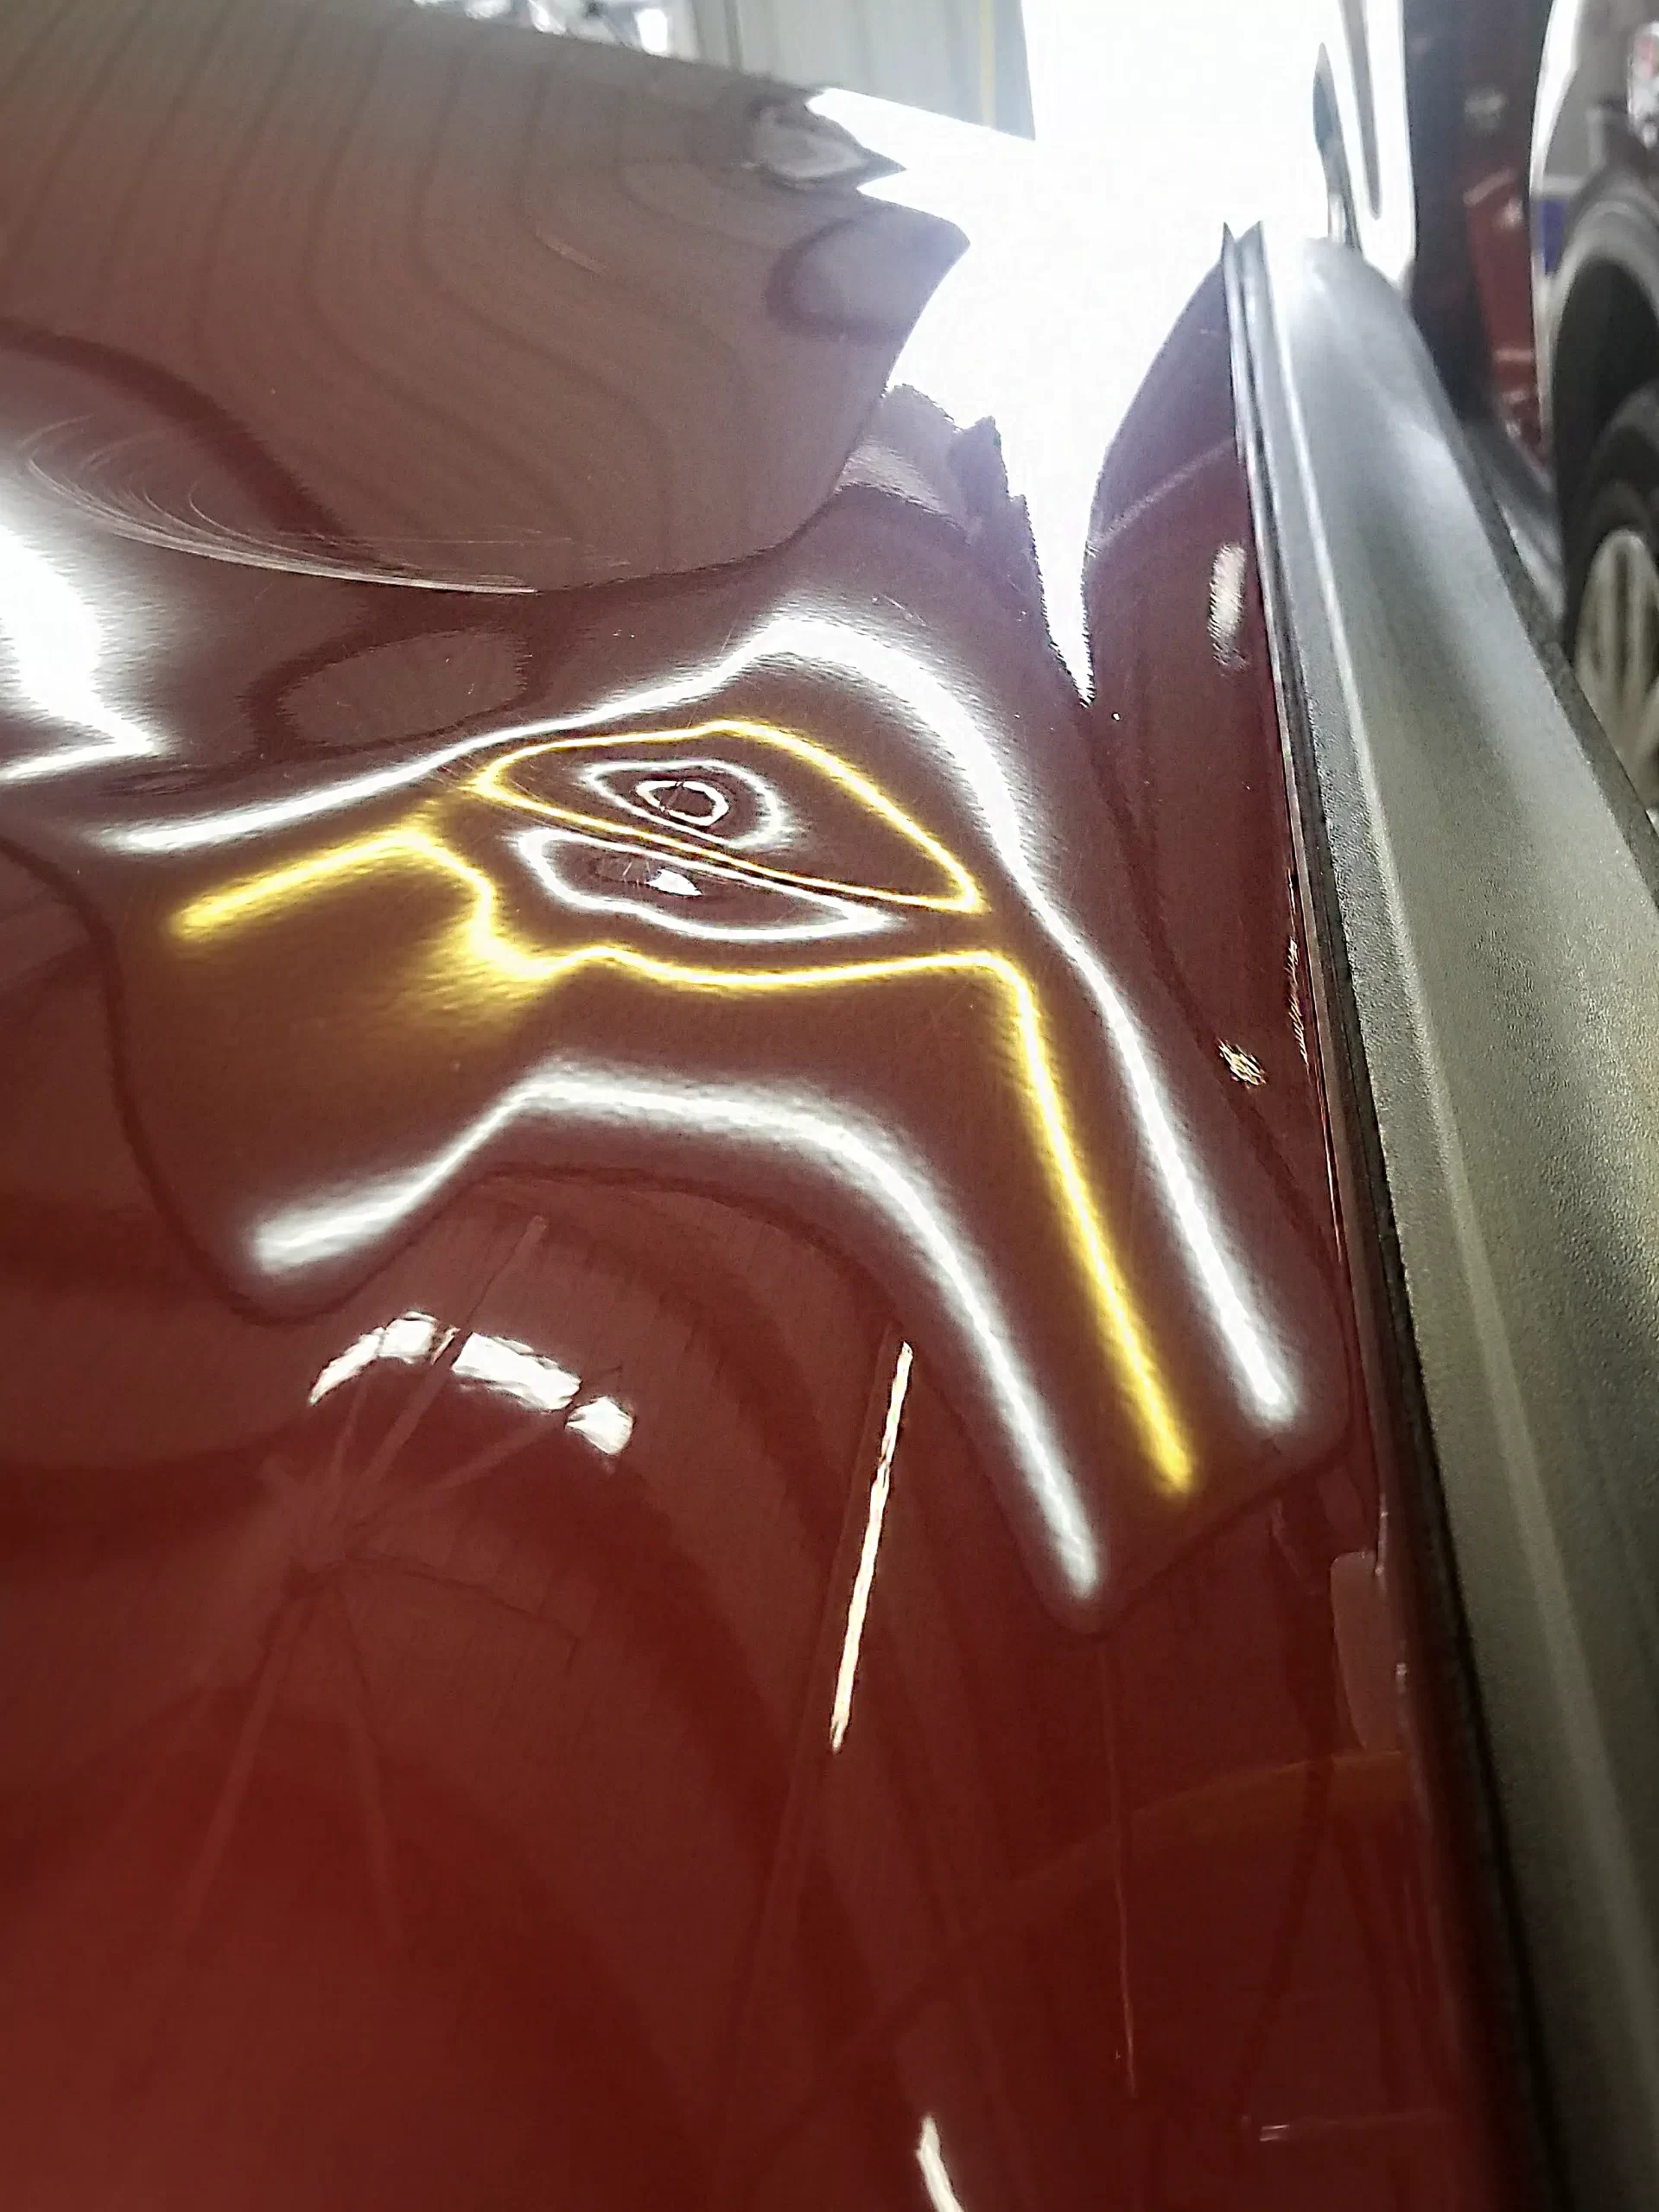 The slightly dented surface of a cherry red vehicle before in a garage prior to repairs.